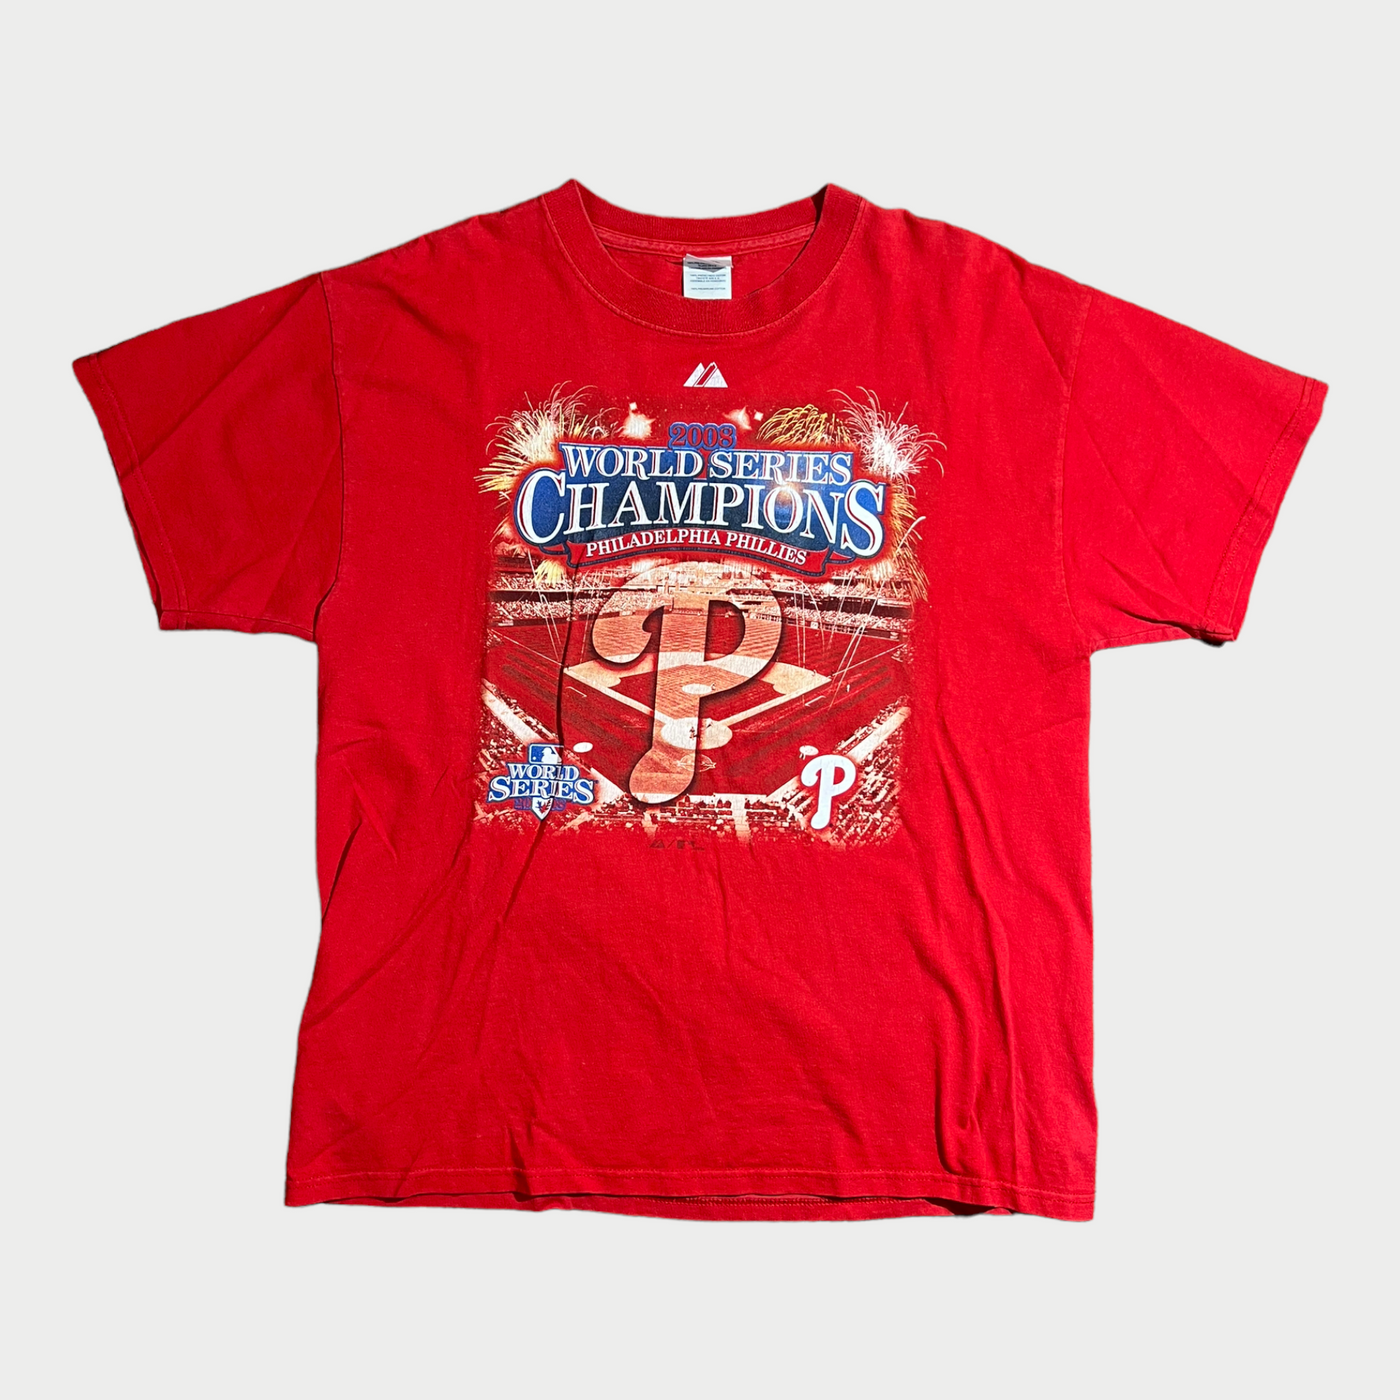 Vintage T-Shirt With 2008 MLB World Series Champions Graphic Front